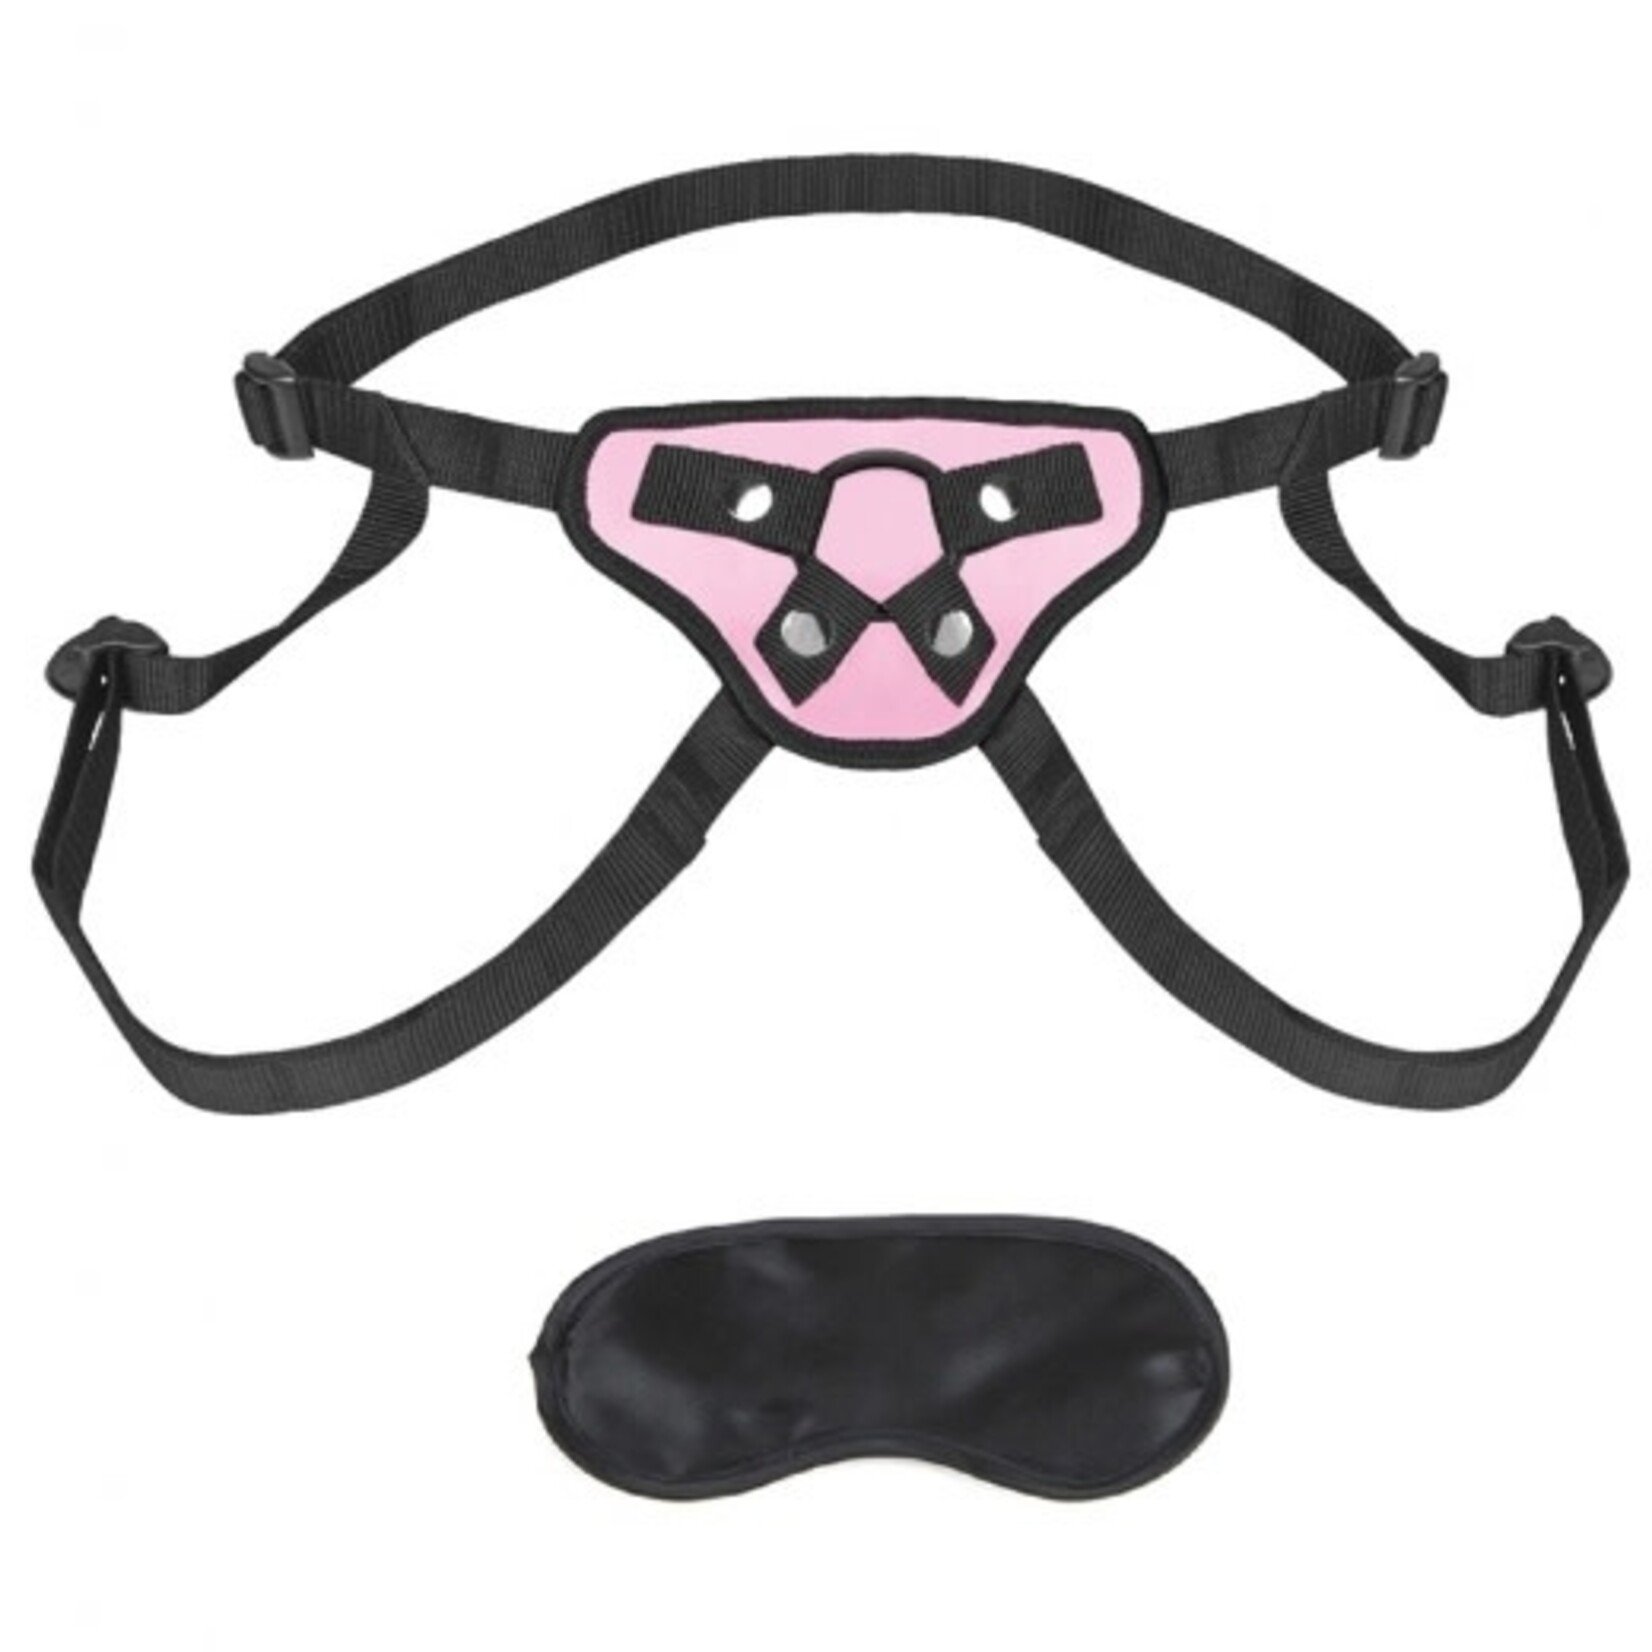 LUX FETISH LUX FETISH PRETTY IN PINK STRAP-ON HARNESS